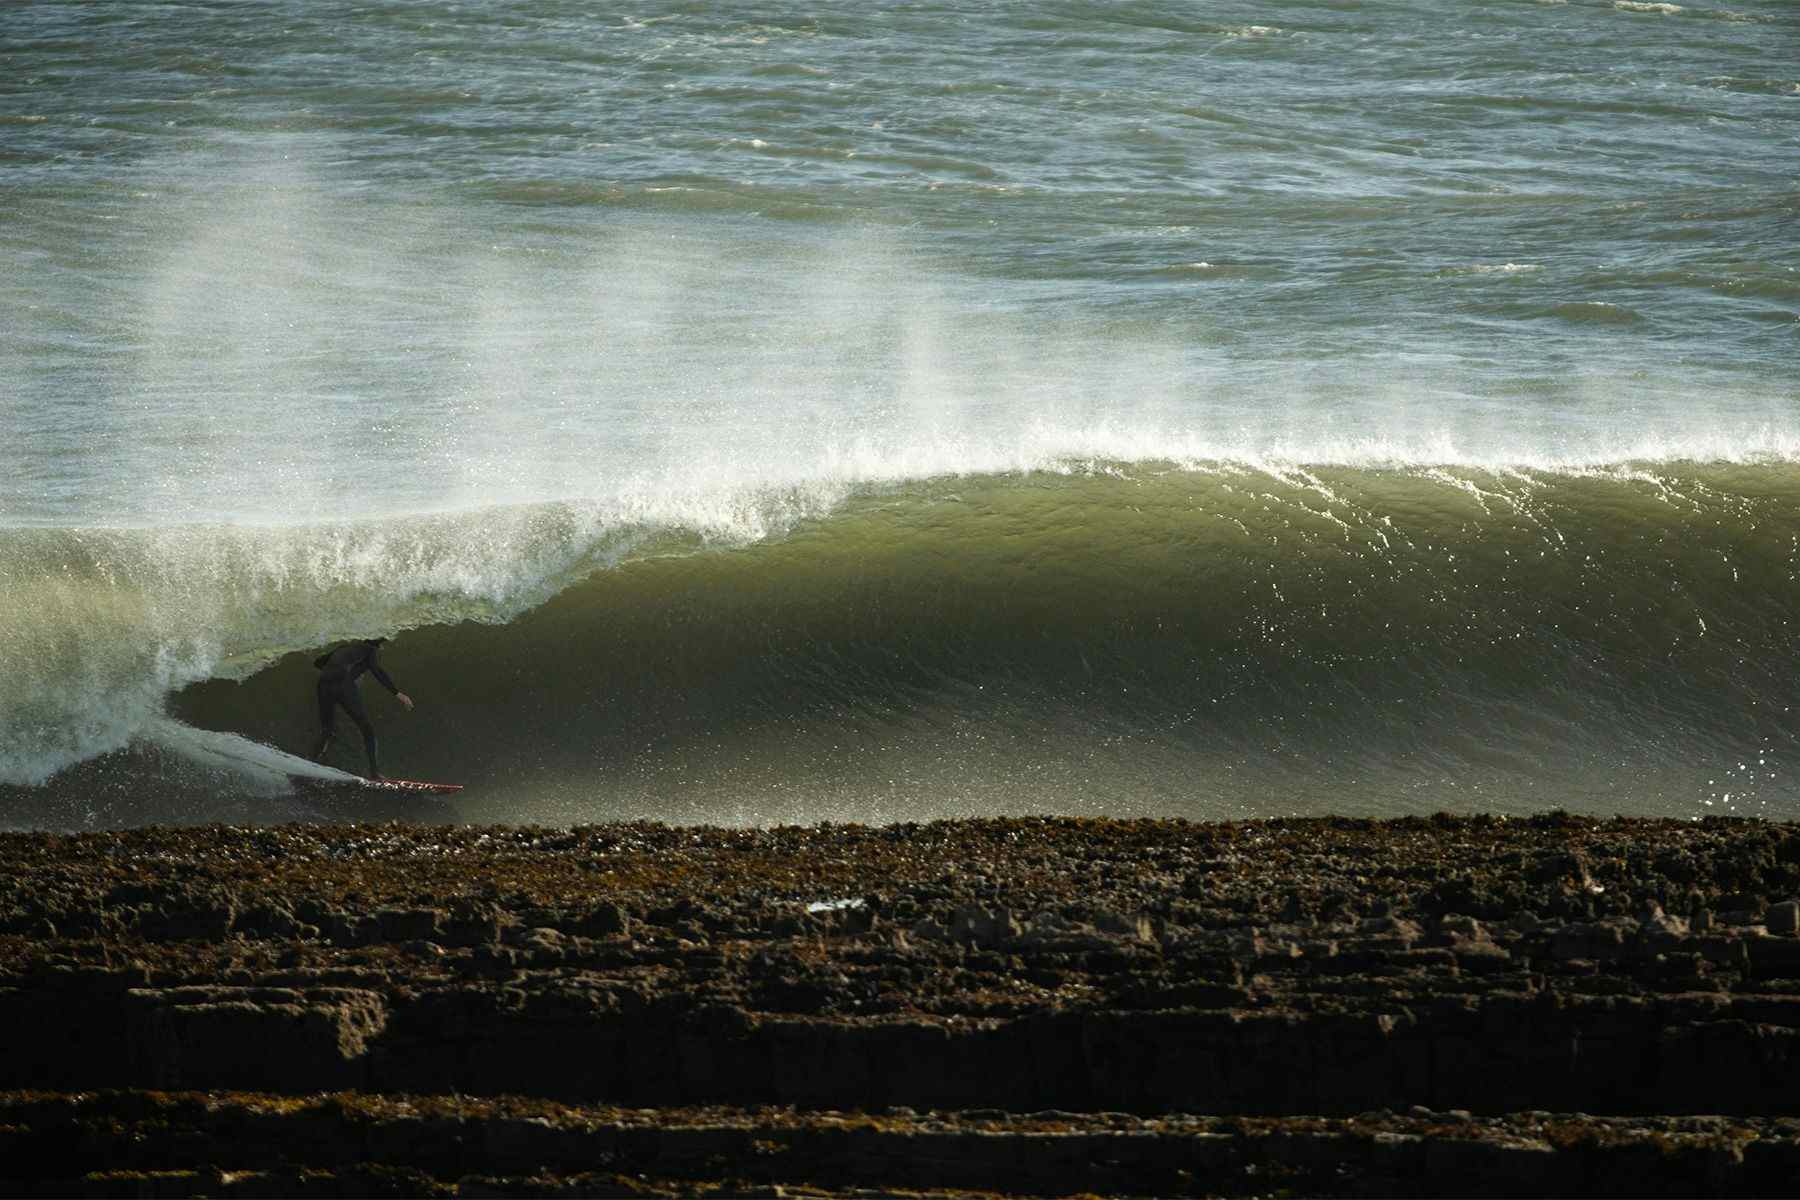 surfer noah lane on a barrelling left hand wave, surfing wearing a natural rubber wetsuit